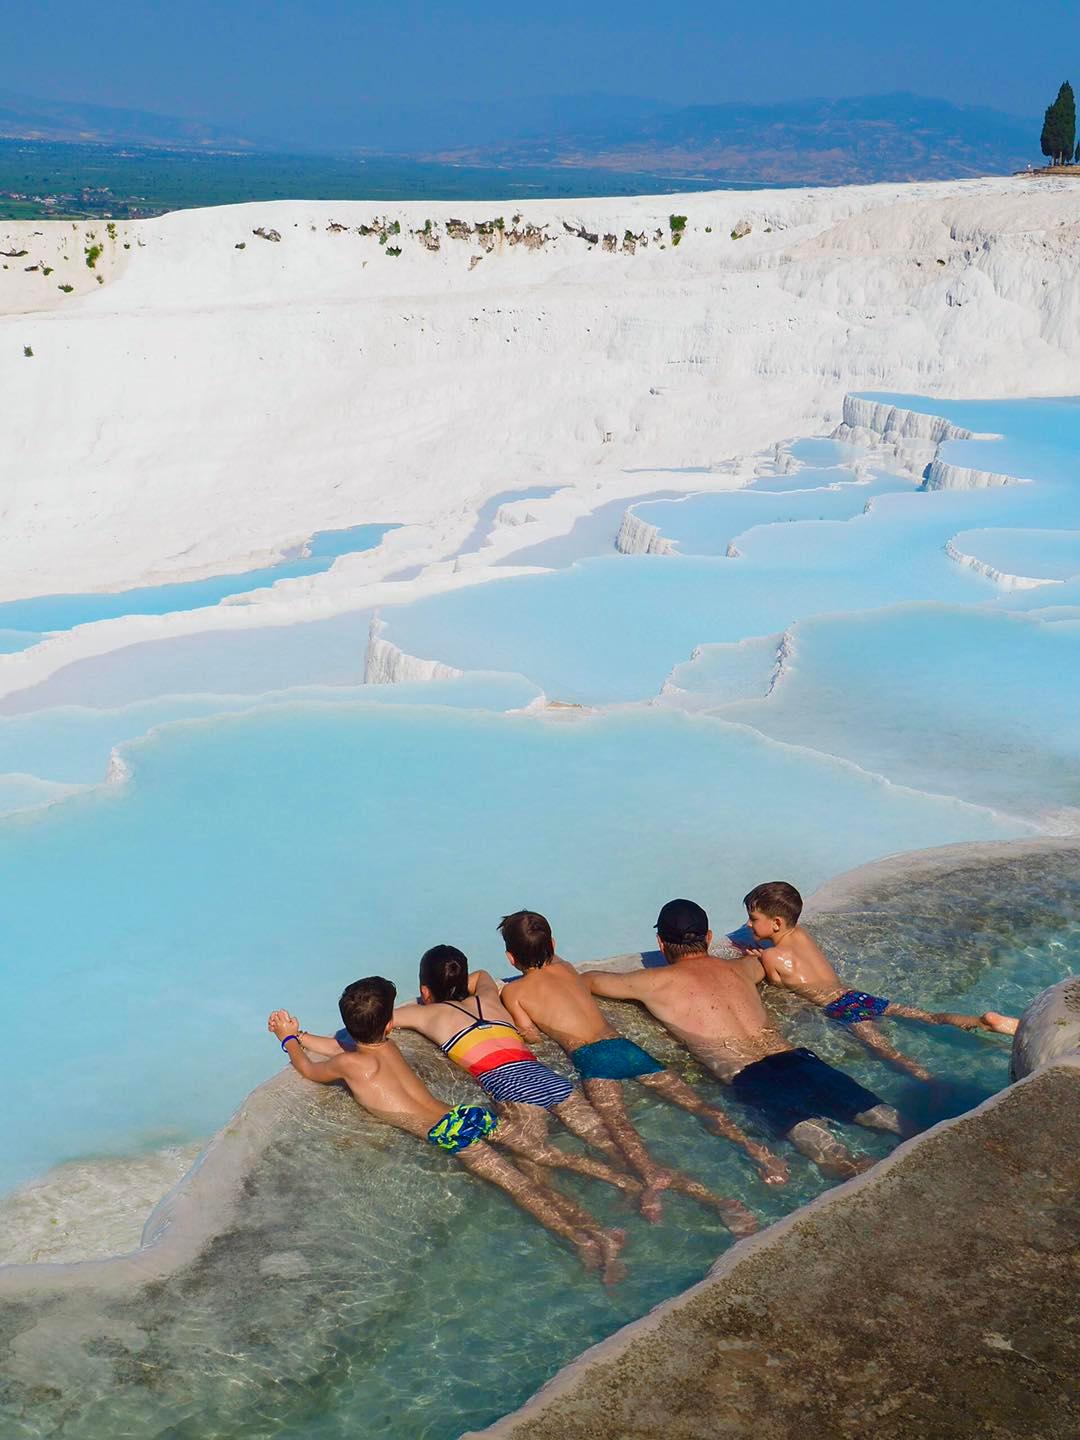 Sebastien and his kids enjoy the view at Pamukkale, Turkey. (Courtesy of Edith Lemay)